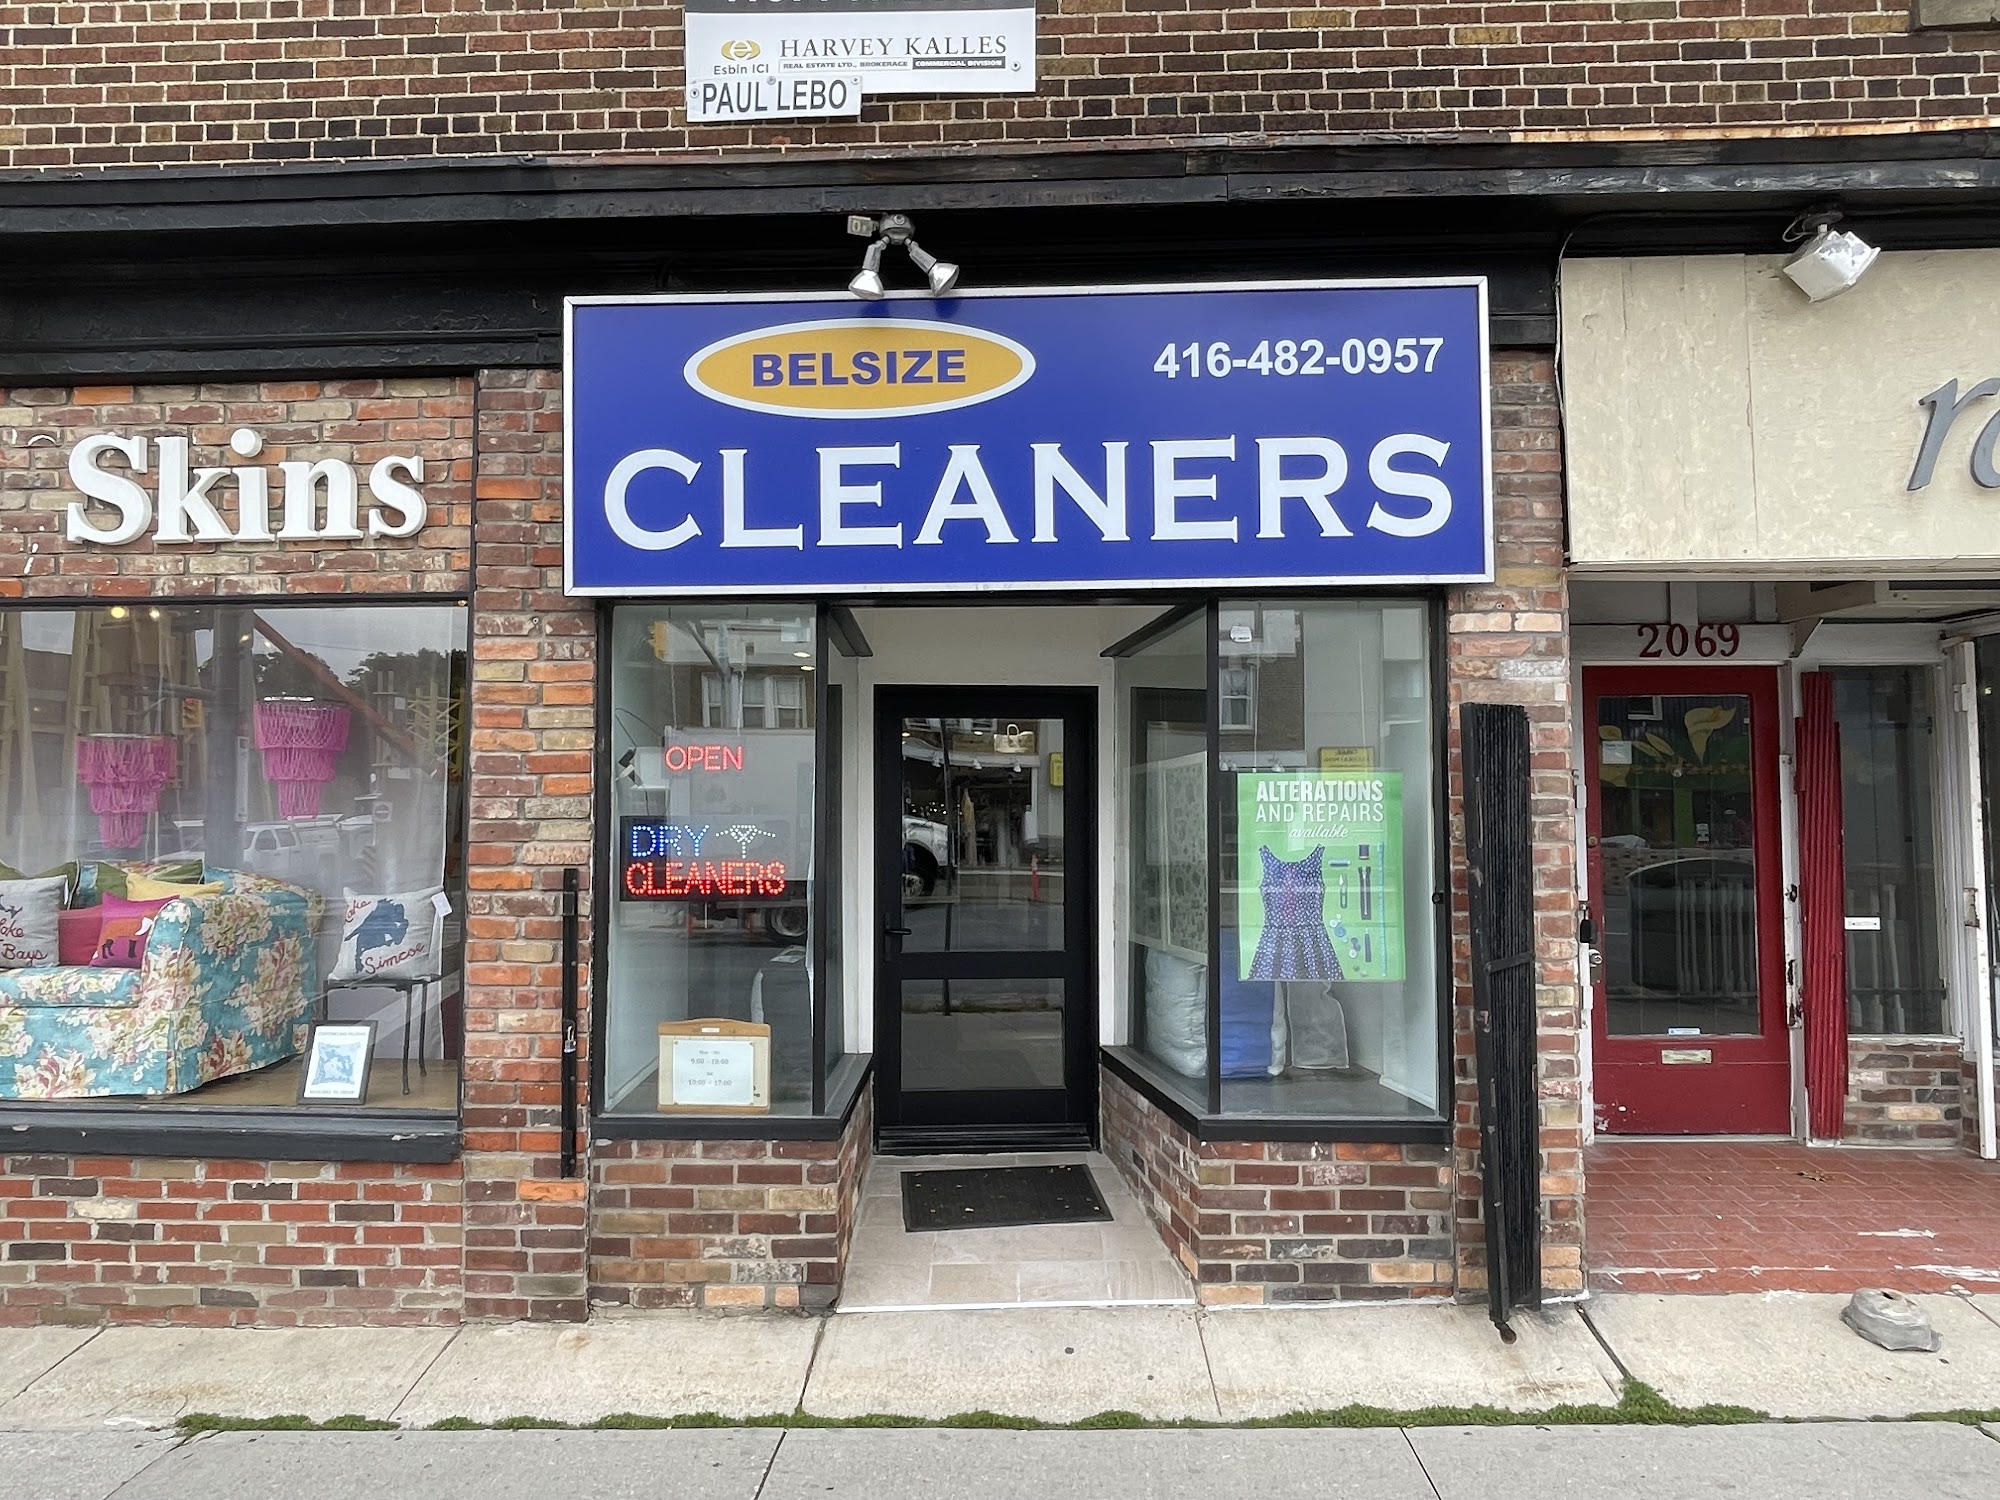 Belsize Cleaners